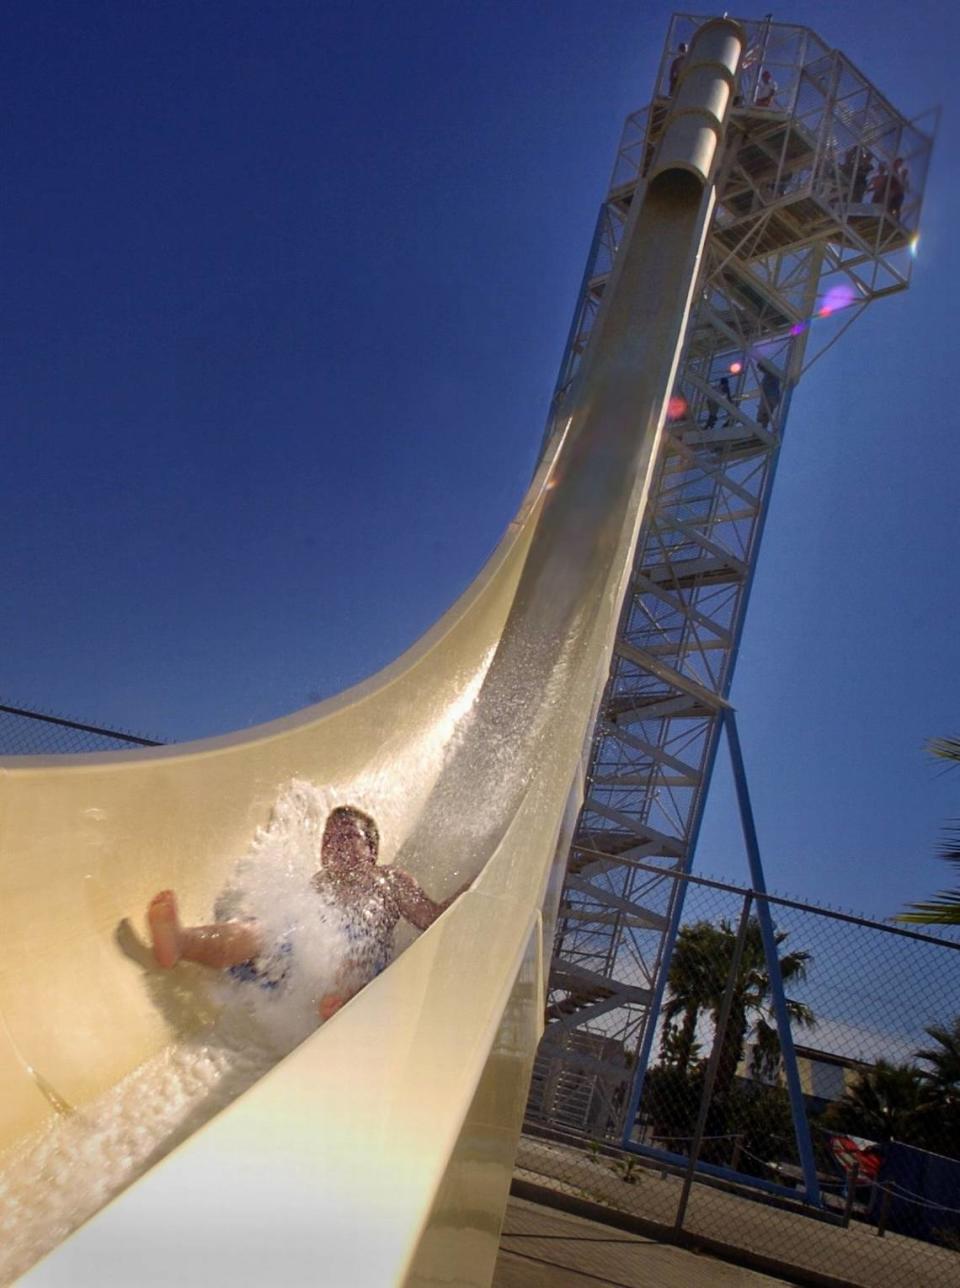 This September 2004 photo of the Manteca Waterslides’ V-Max shows first-time slider Johnathan Barnett, 8, of Modesto making the maiden voyage as he braved the decent from the top of the tower.